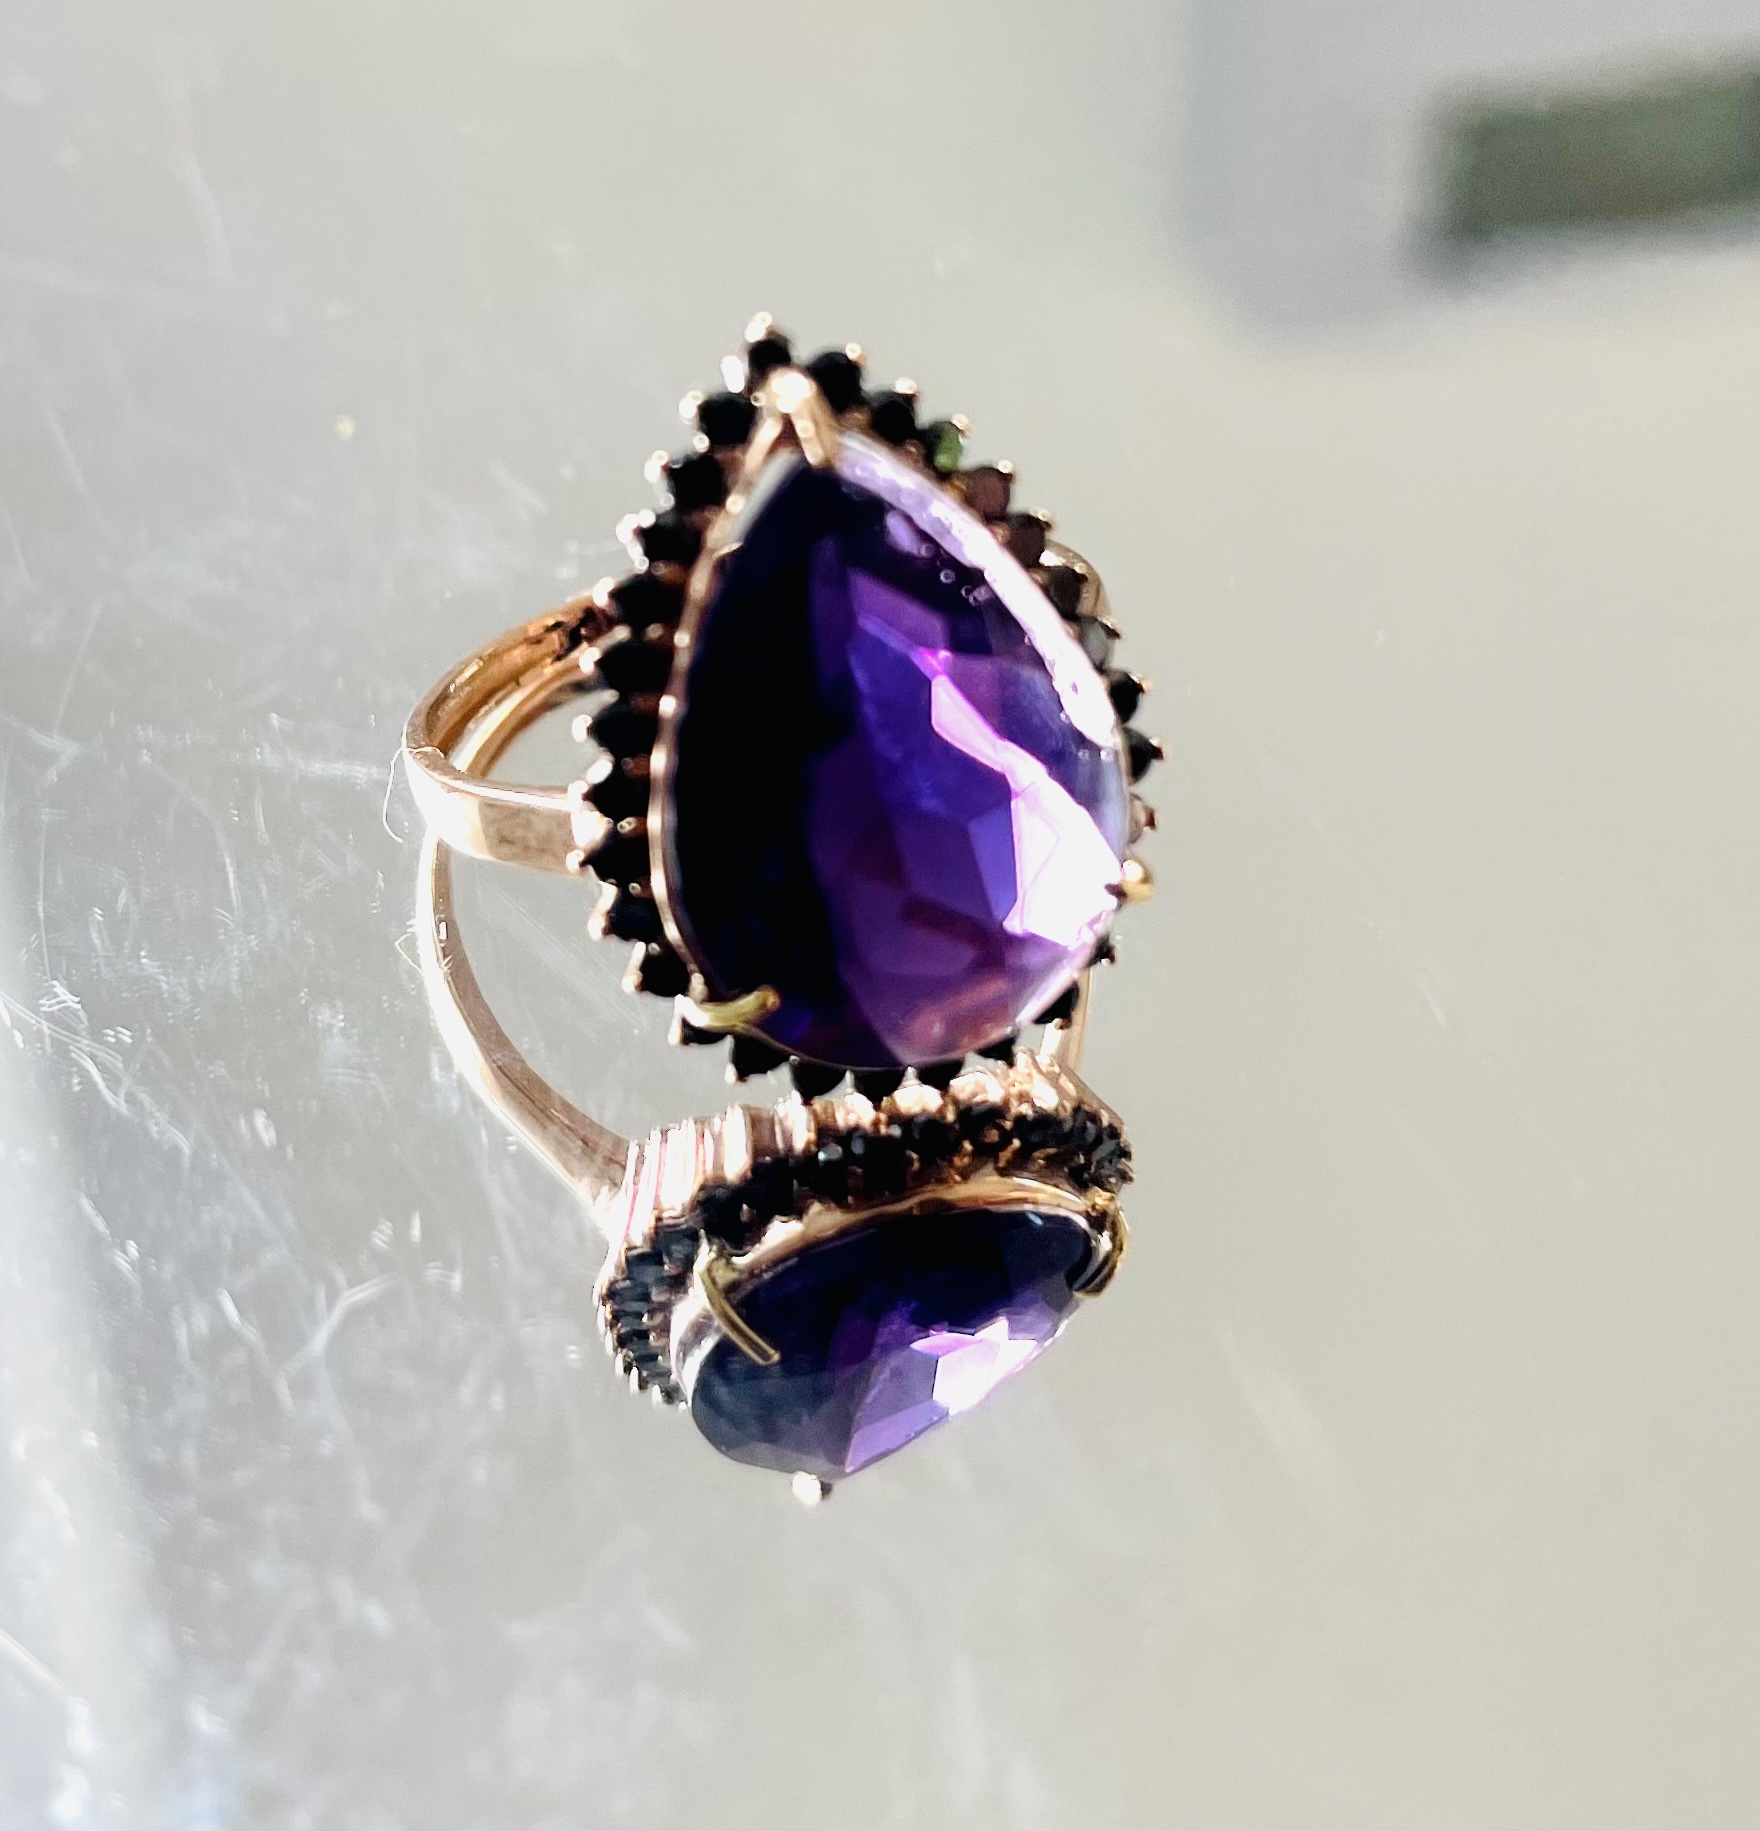 Beautiful Natural Amethyst 4.38ct With Natural Black Diamond & 18k White Gold - Image 2 of 8